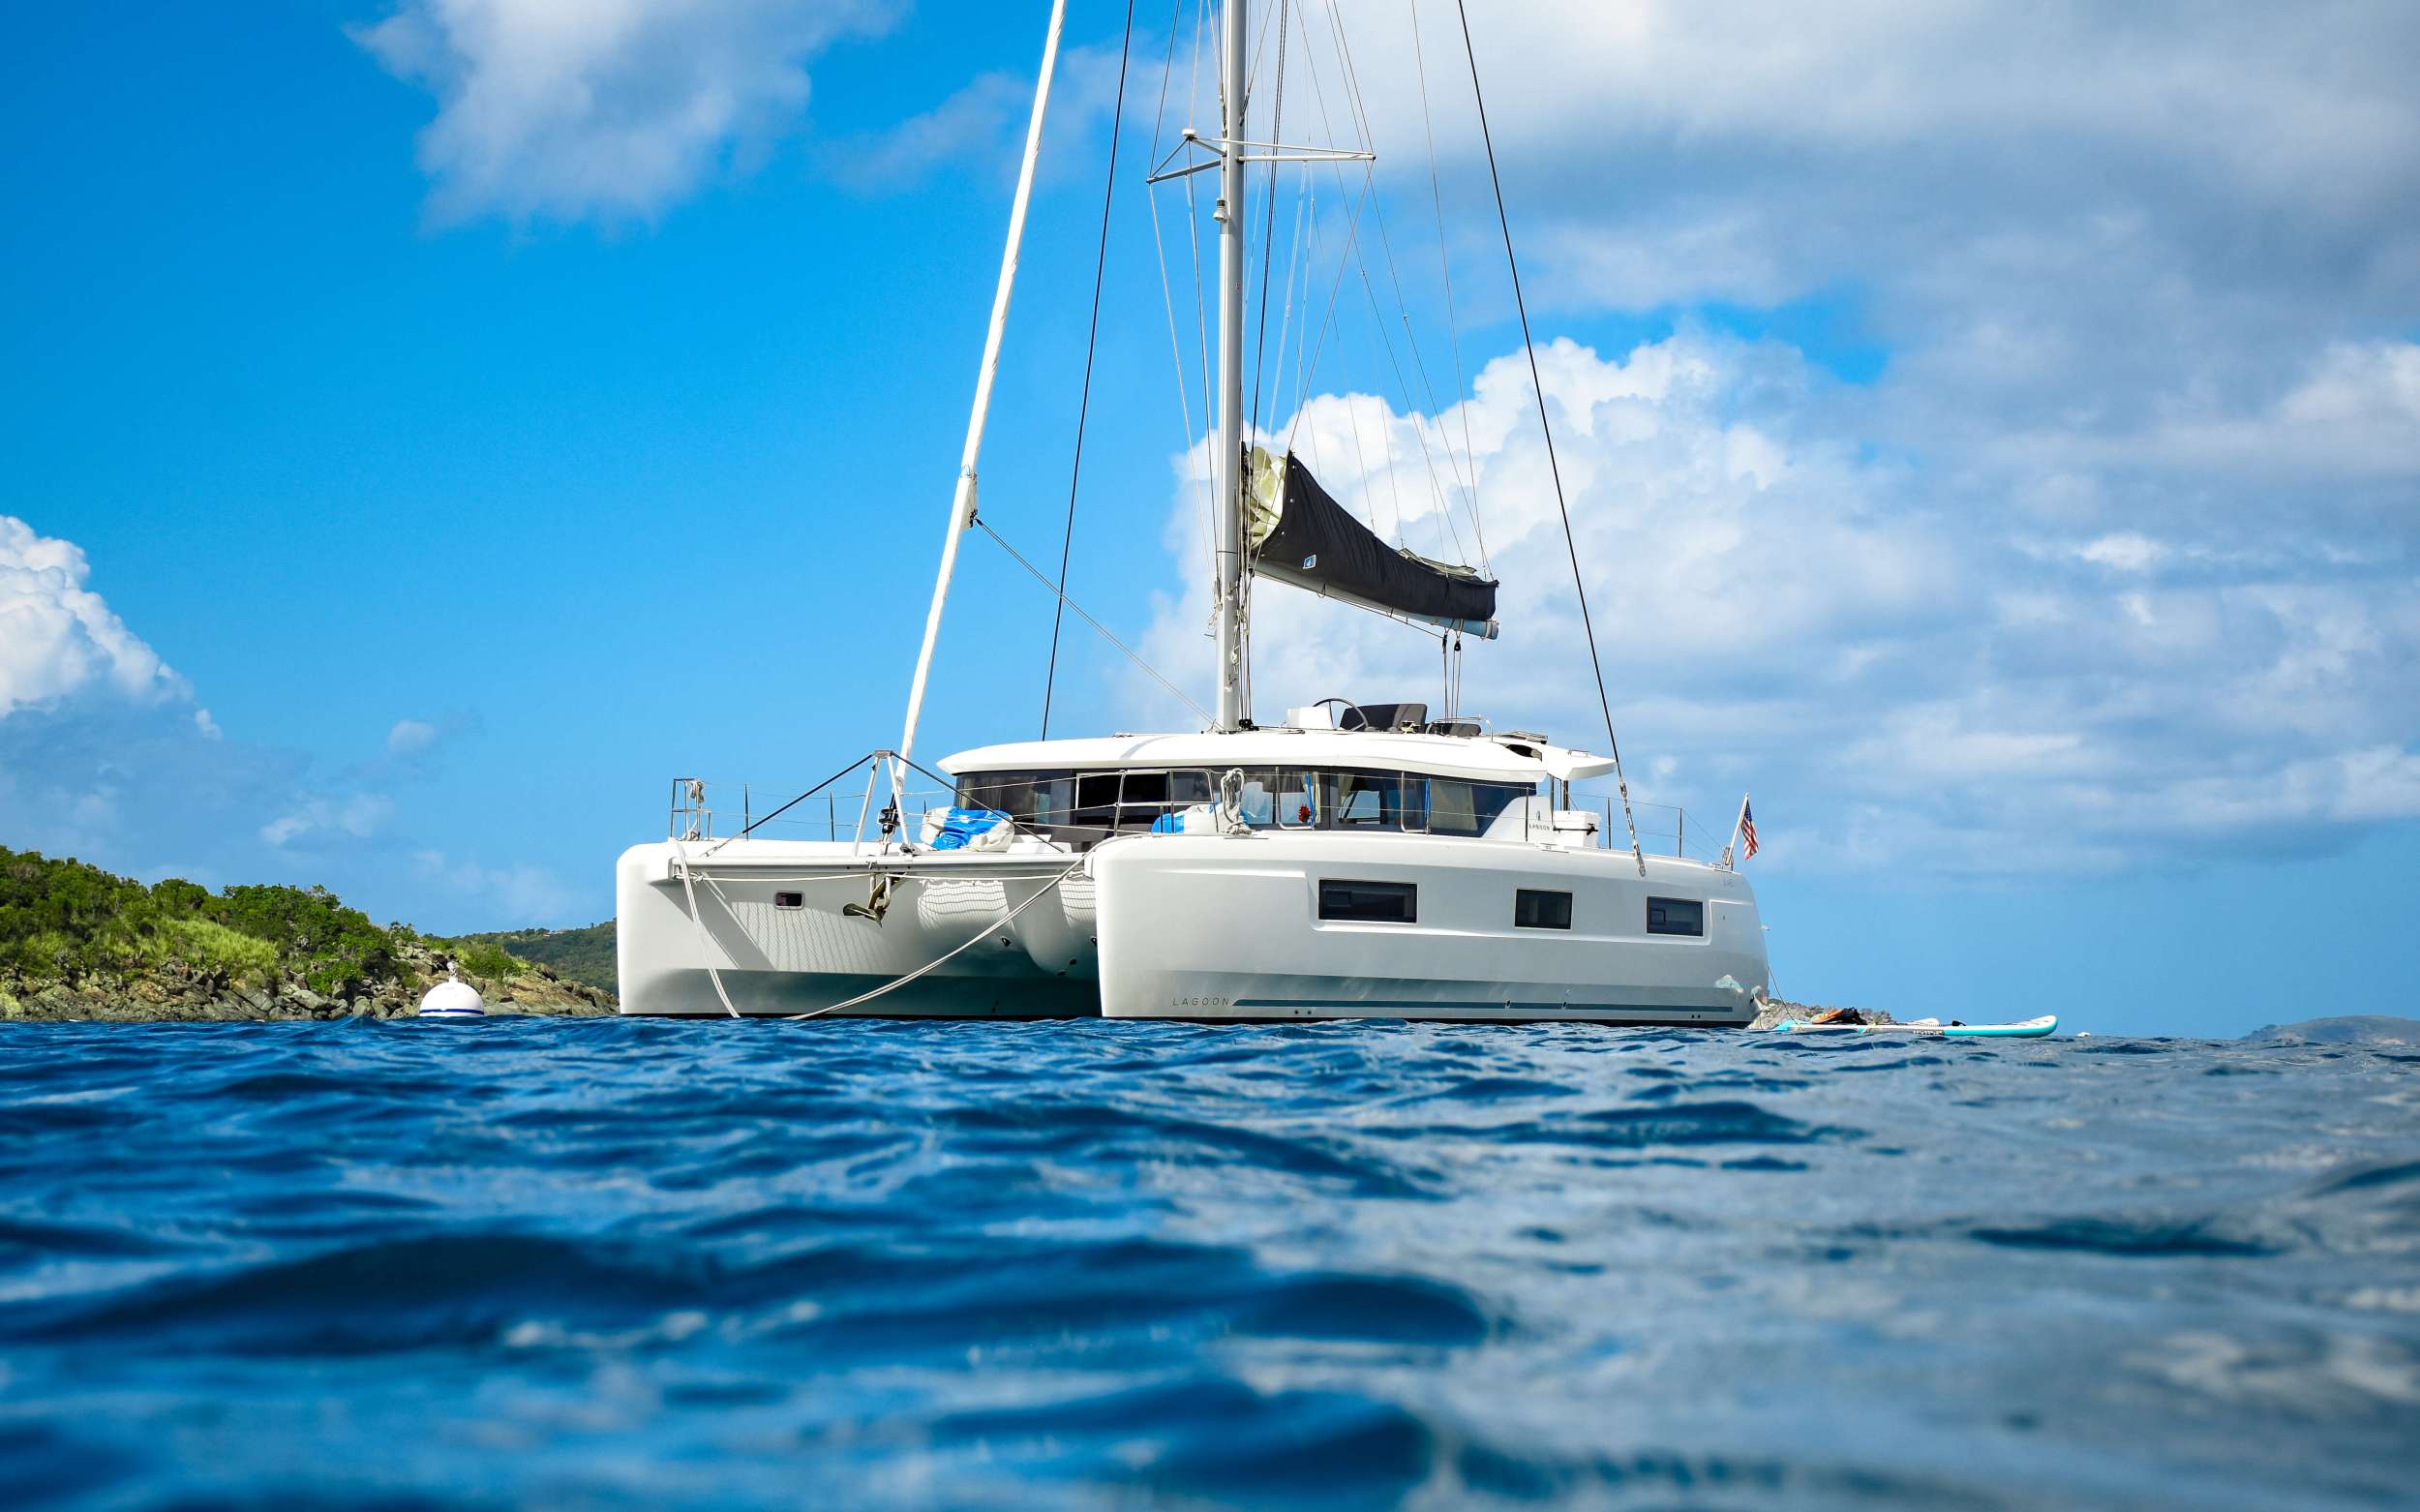 CELAVIE - Luxury yacht charter St Lucia & Boat hire in Caribbean 2